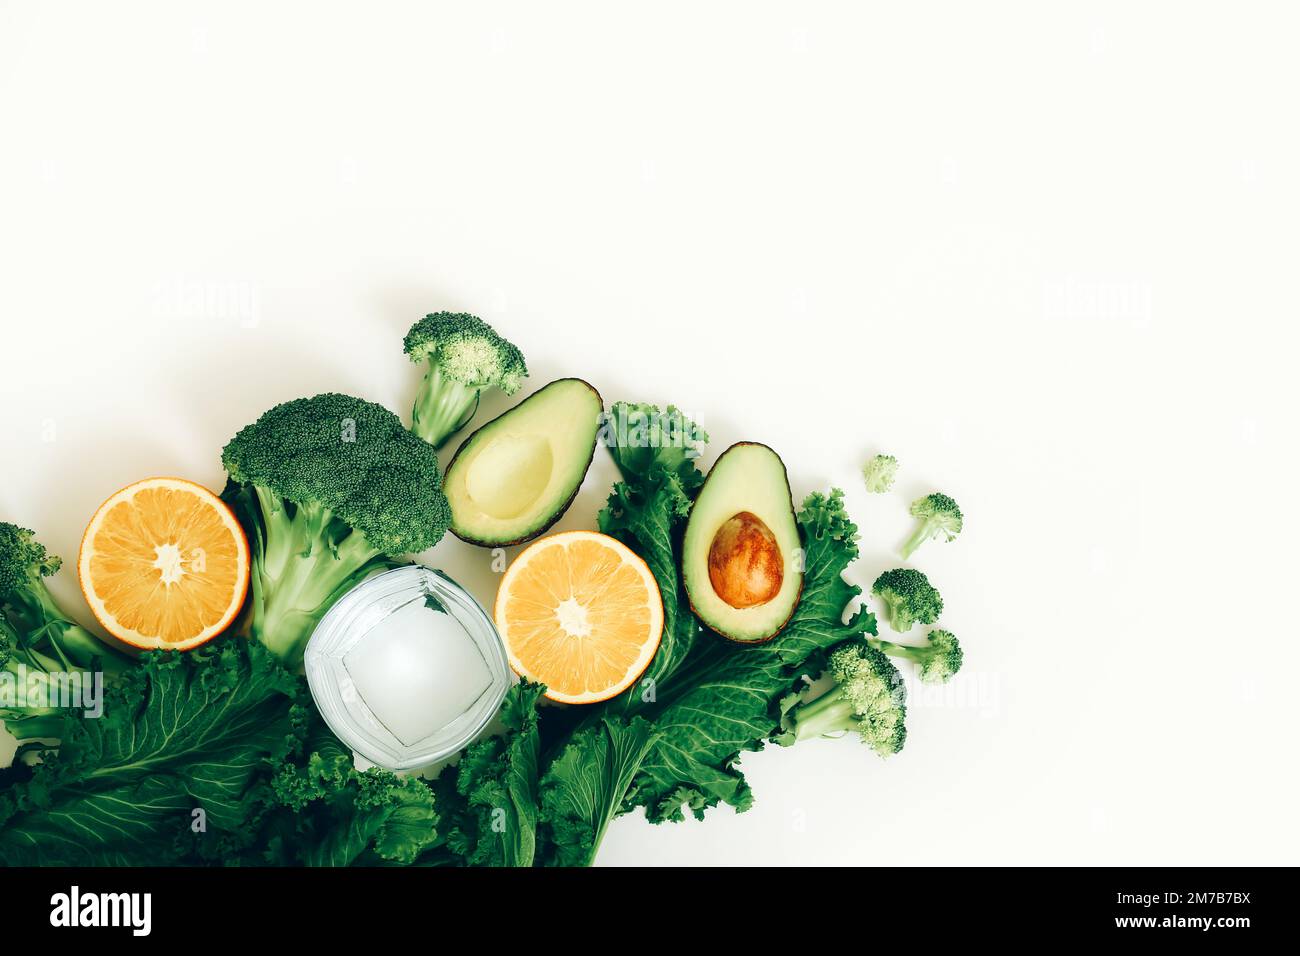 Glass of pure water, avocado, broccoli, orange and lettuce on the white table. Healthy lifestyle and diet concept. Stock Photo